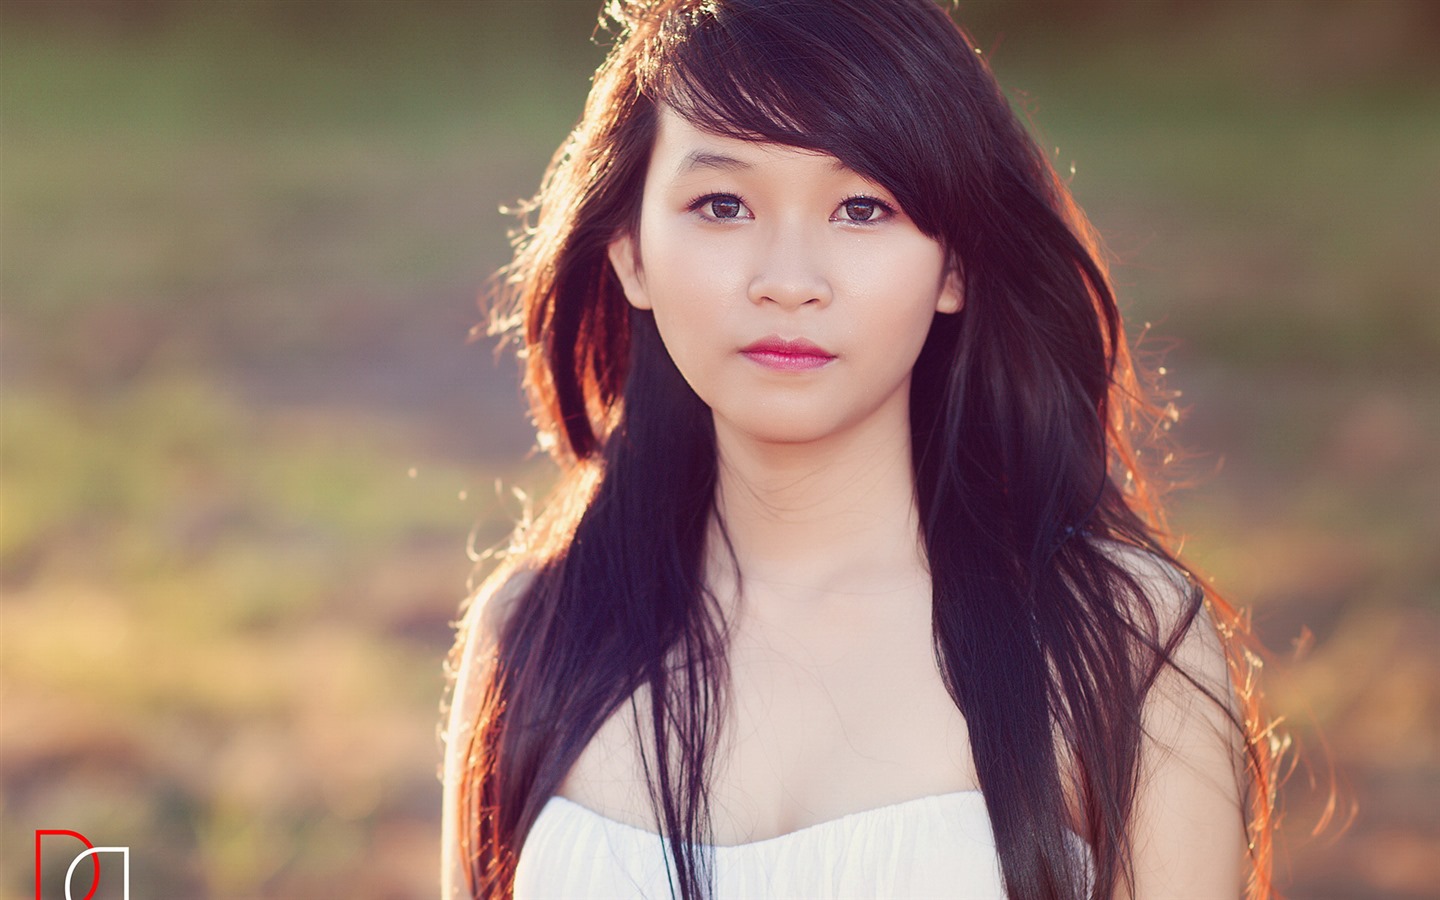 Pure and lovely young Asian girl HD wallpapers collection (4) #25 - 1440x900